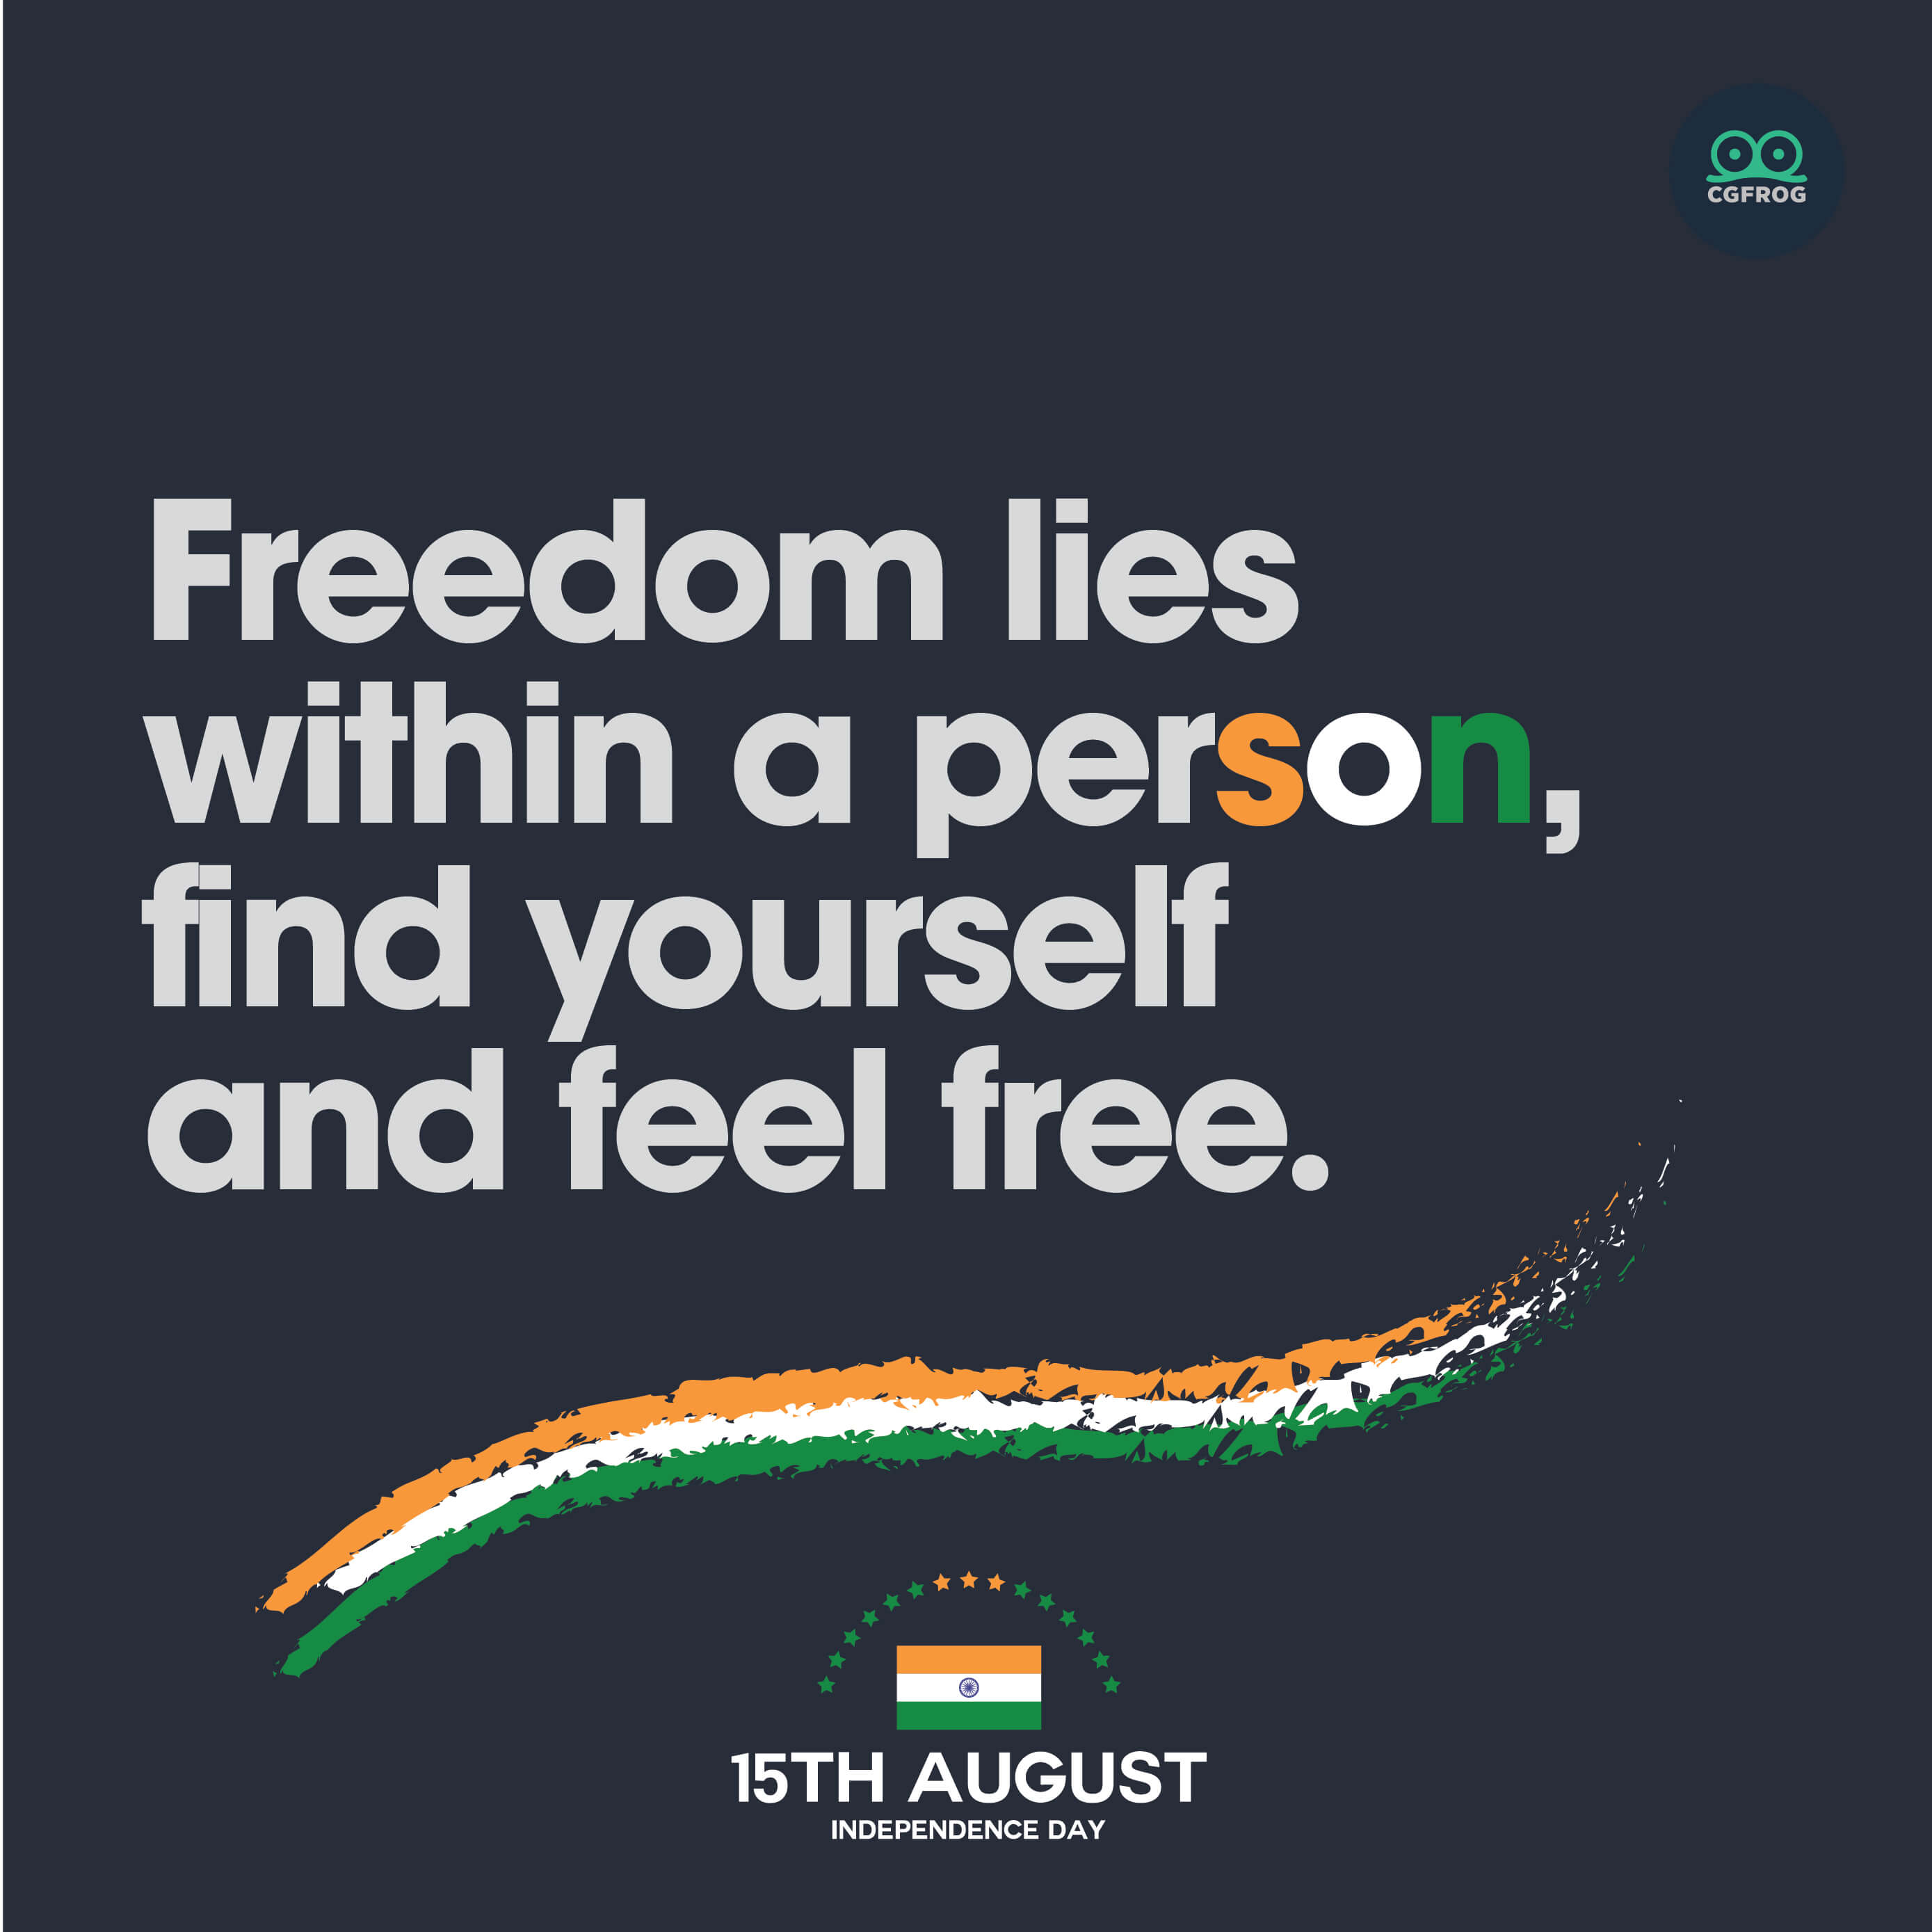 11 Independence Day 2019 Quotes, Wishes, Images for 73rd Independence Day |  CGfrog